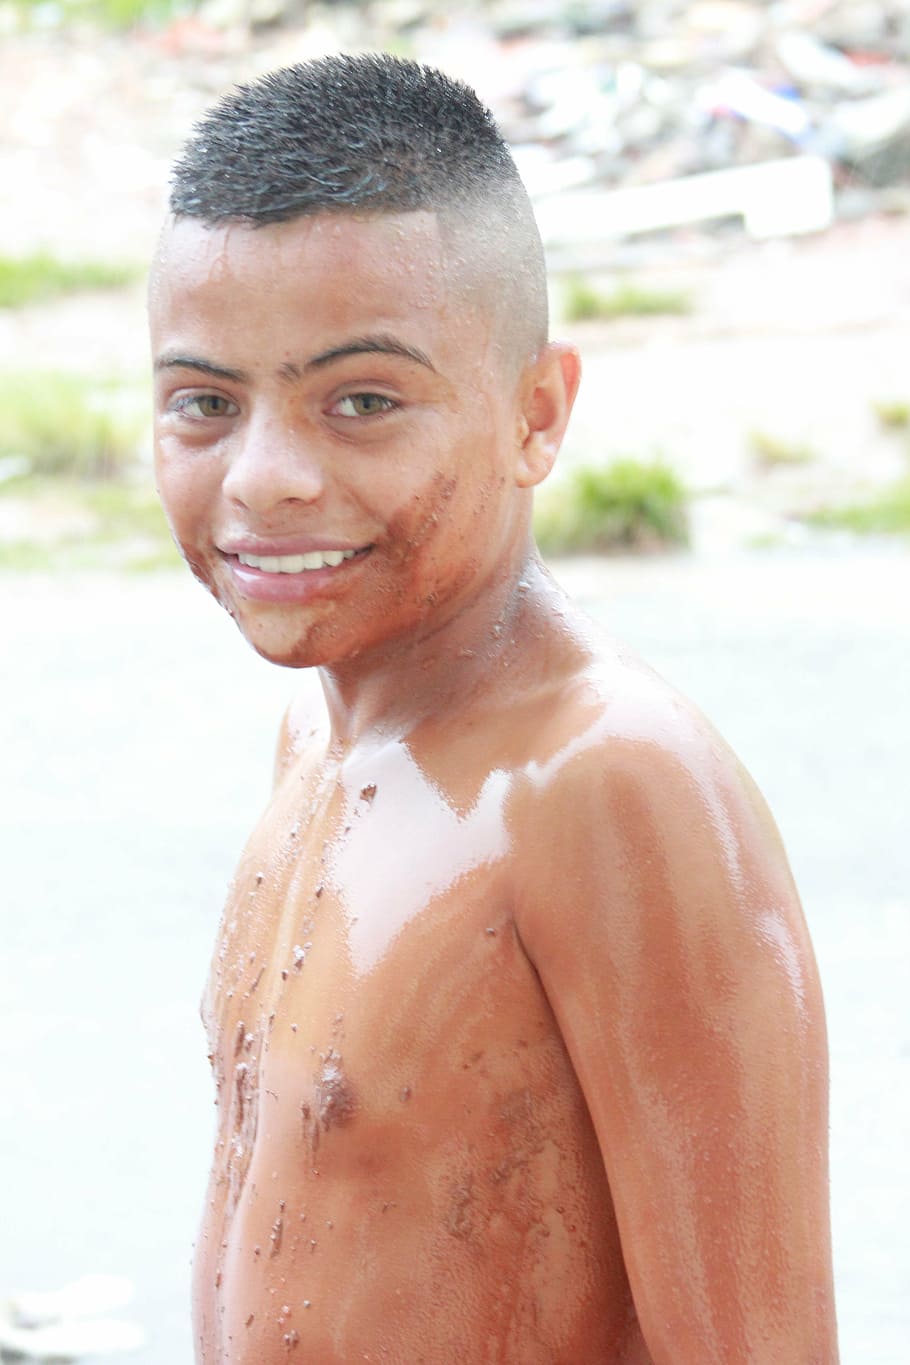 child, dirty, clay, one person, portrait, shirtless, looking at camera, smiling, focus on foreground, leisure activity